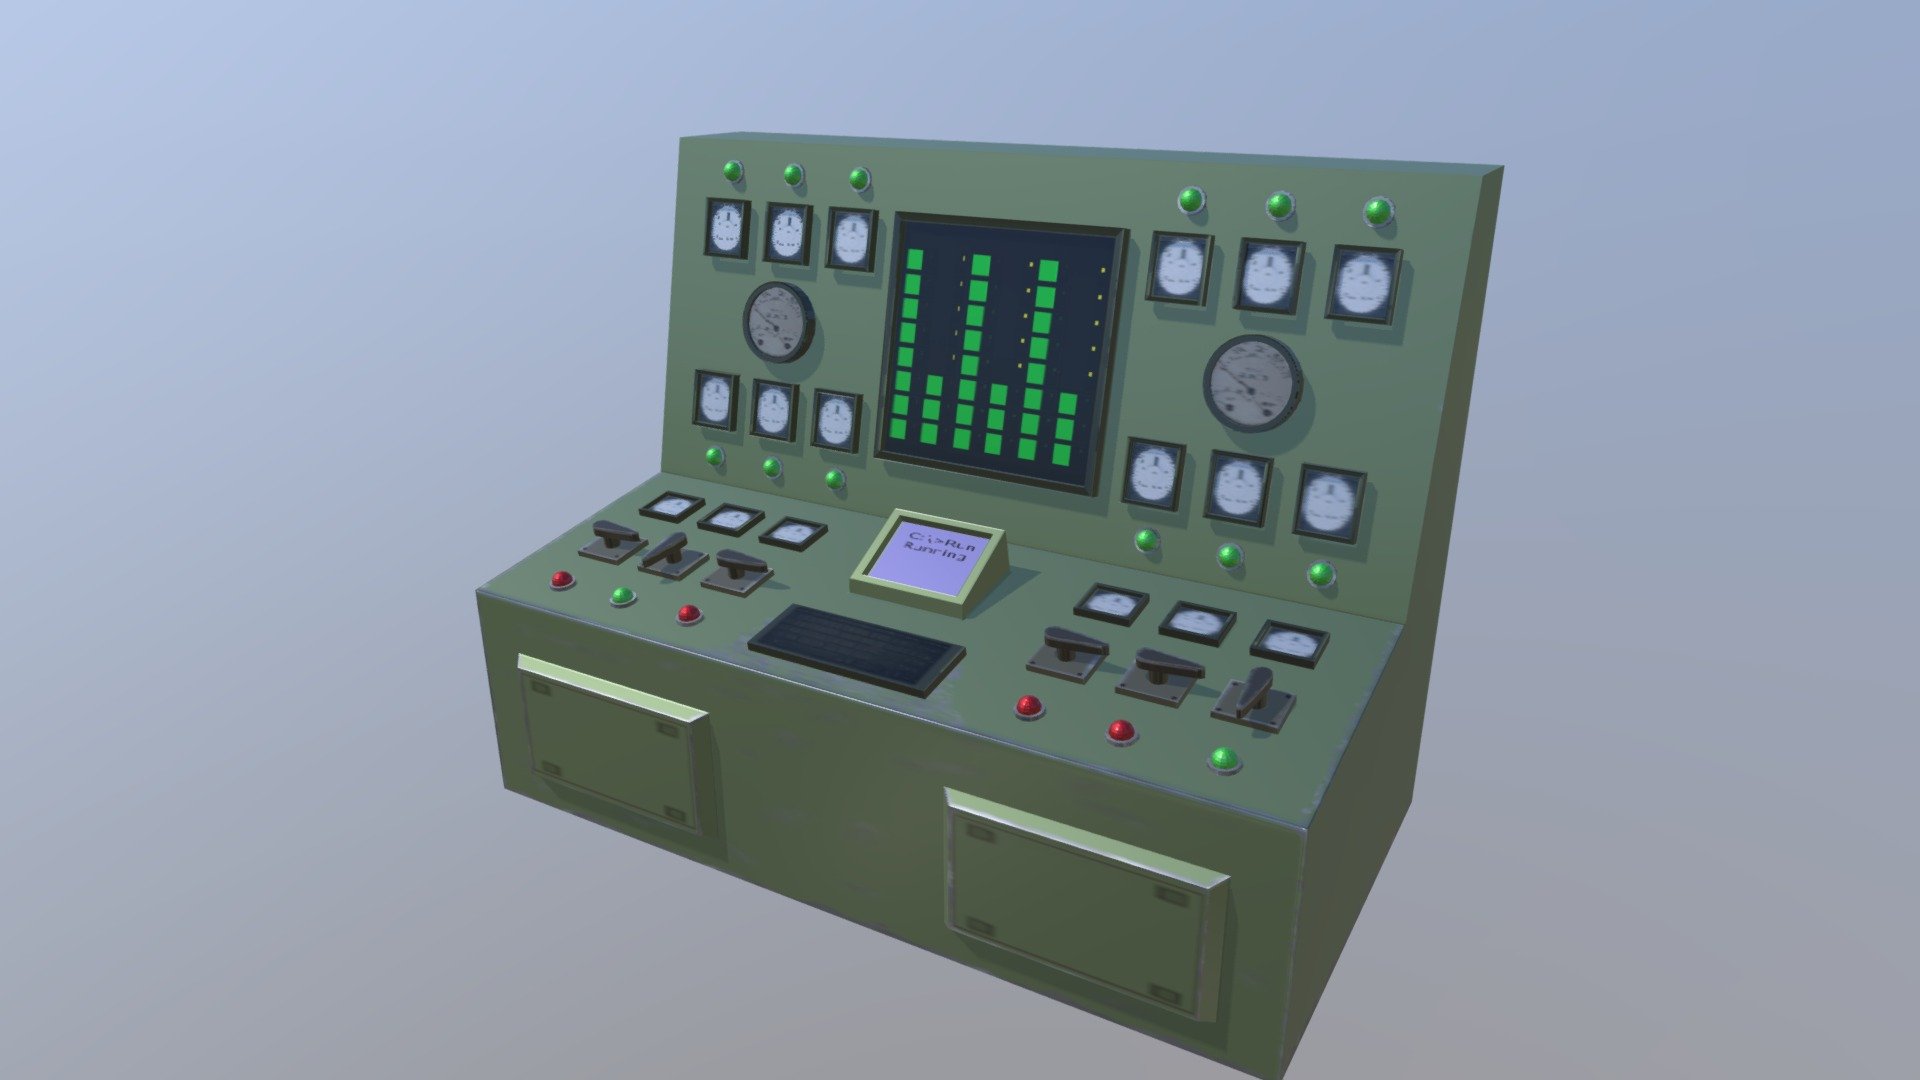 A low poly fantasy Control panel modelled in Blender, again I used some texture painting and used GIMP to add in the layer effect for worn edges, I will be adding a Angled piece to add to this to be used as a modular asset, change the model and or texture if you like, enjoy 3d model